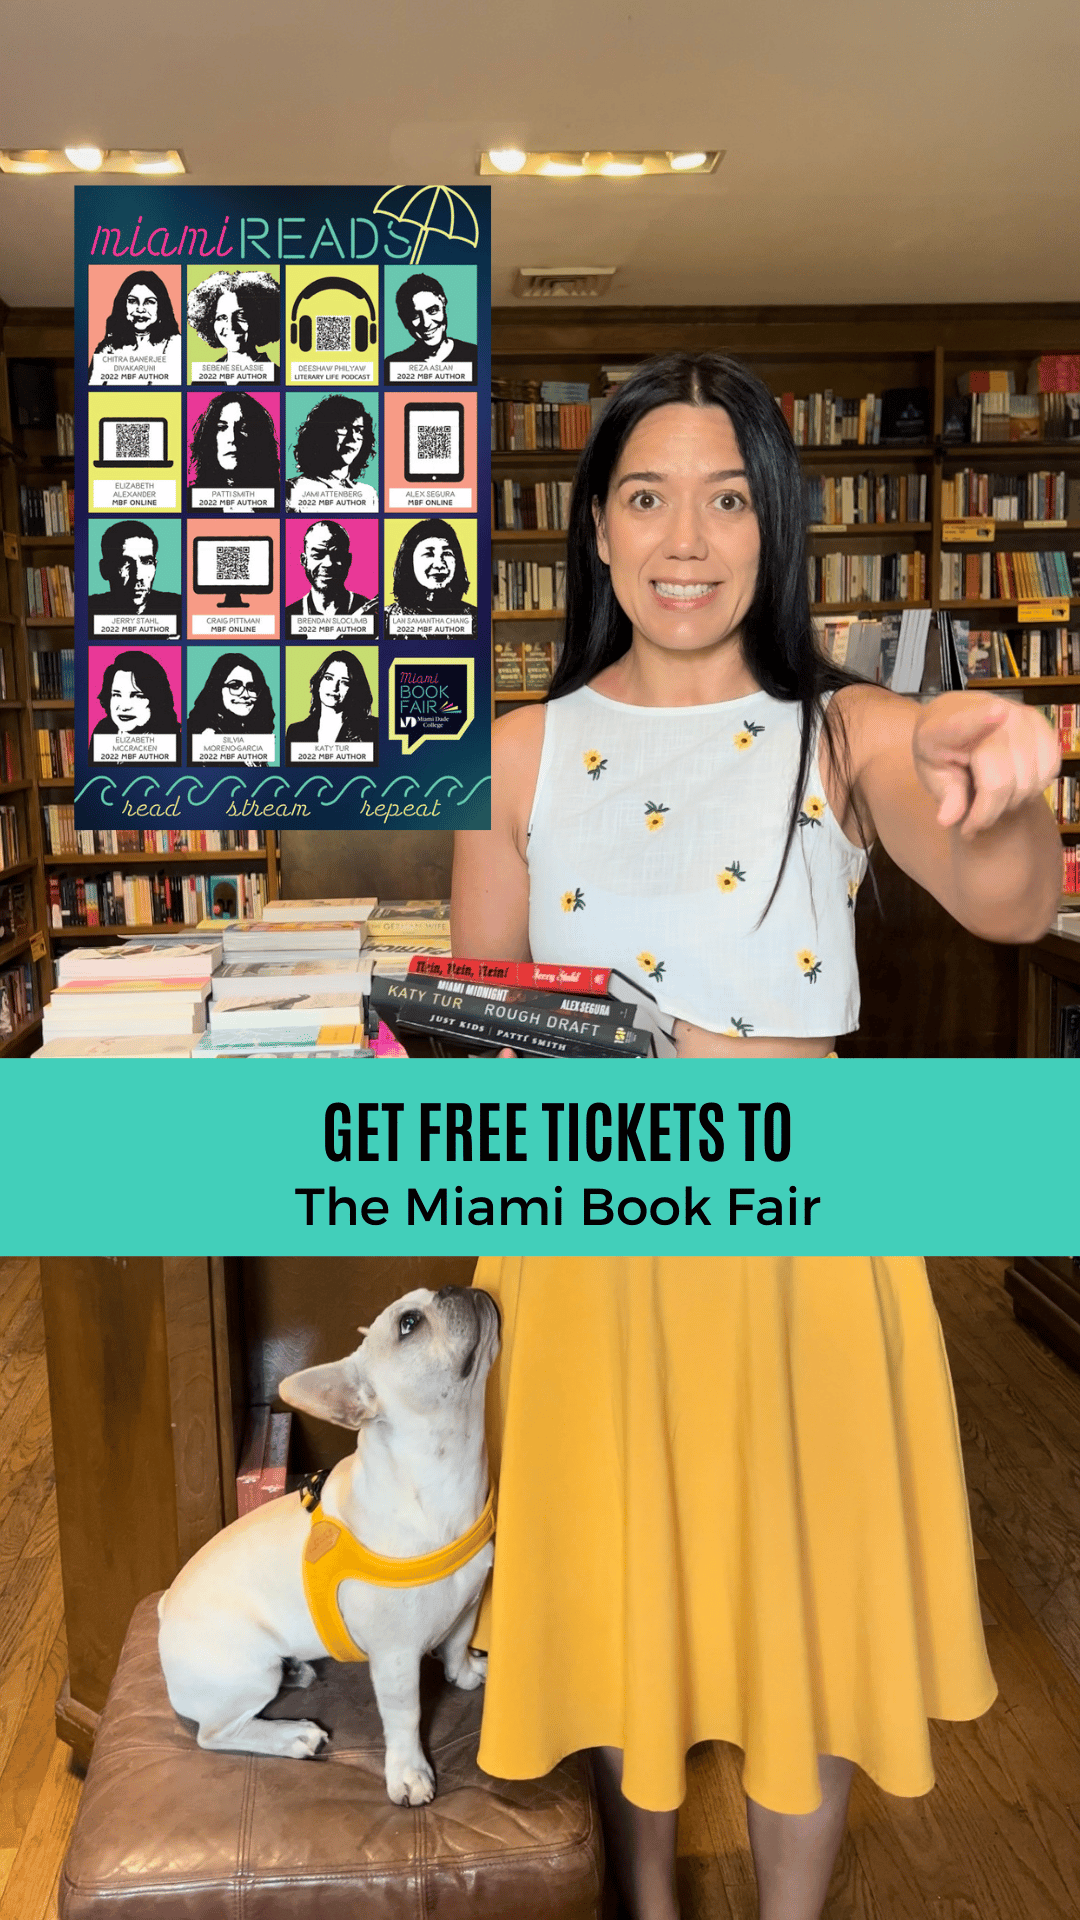 Miami Reads Challenge - get free tickets to the Miami Book Fair